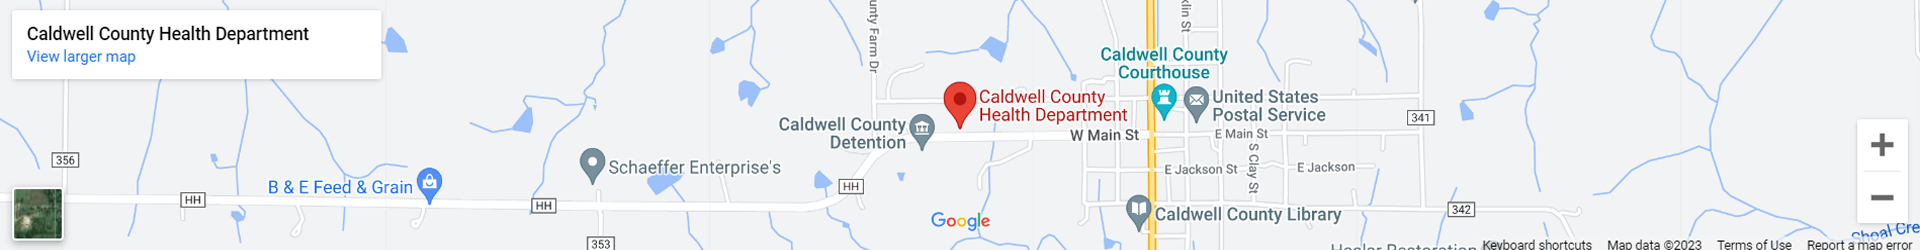 Caldwell County Health Department Map